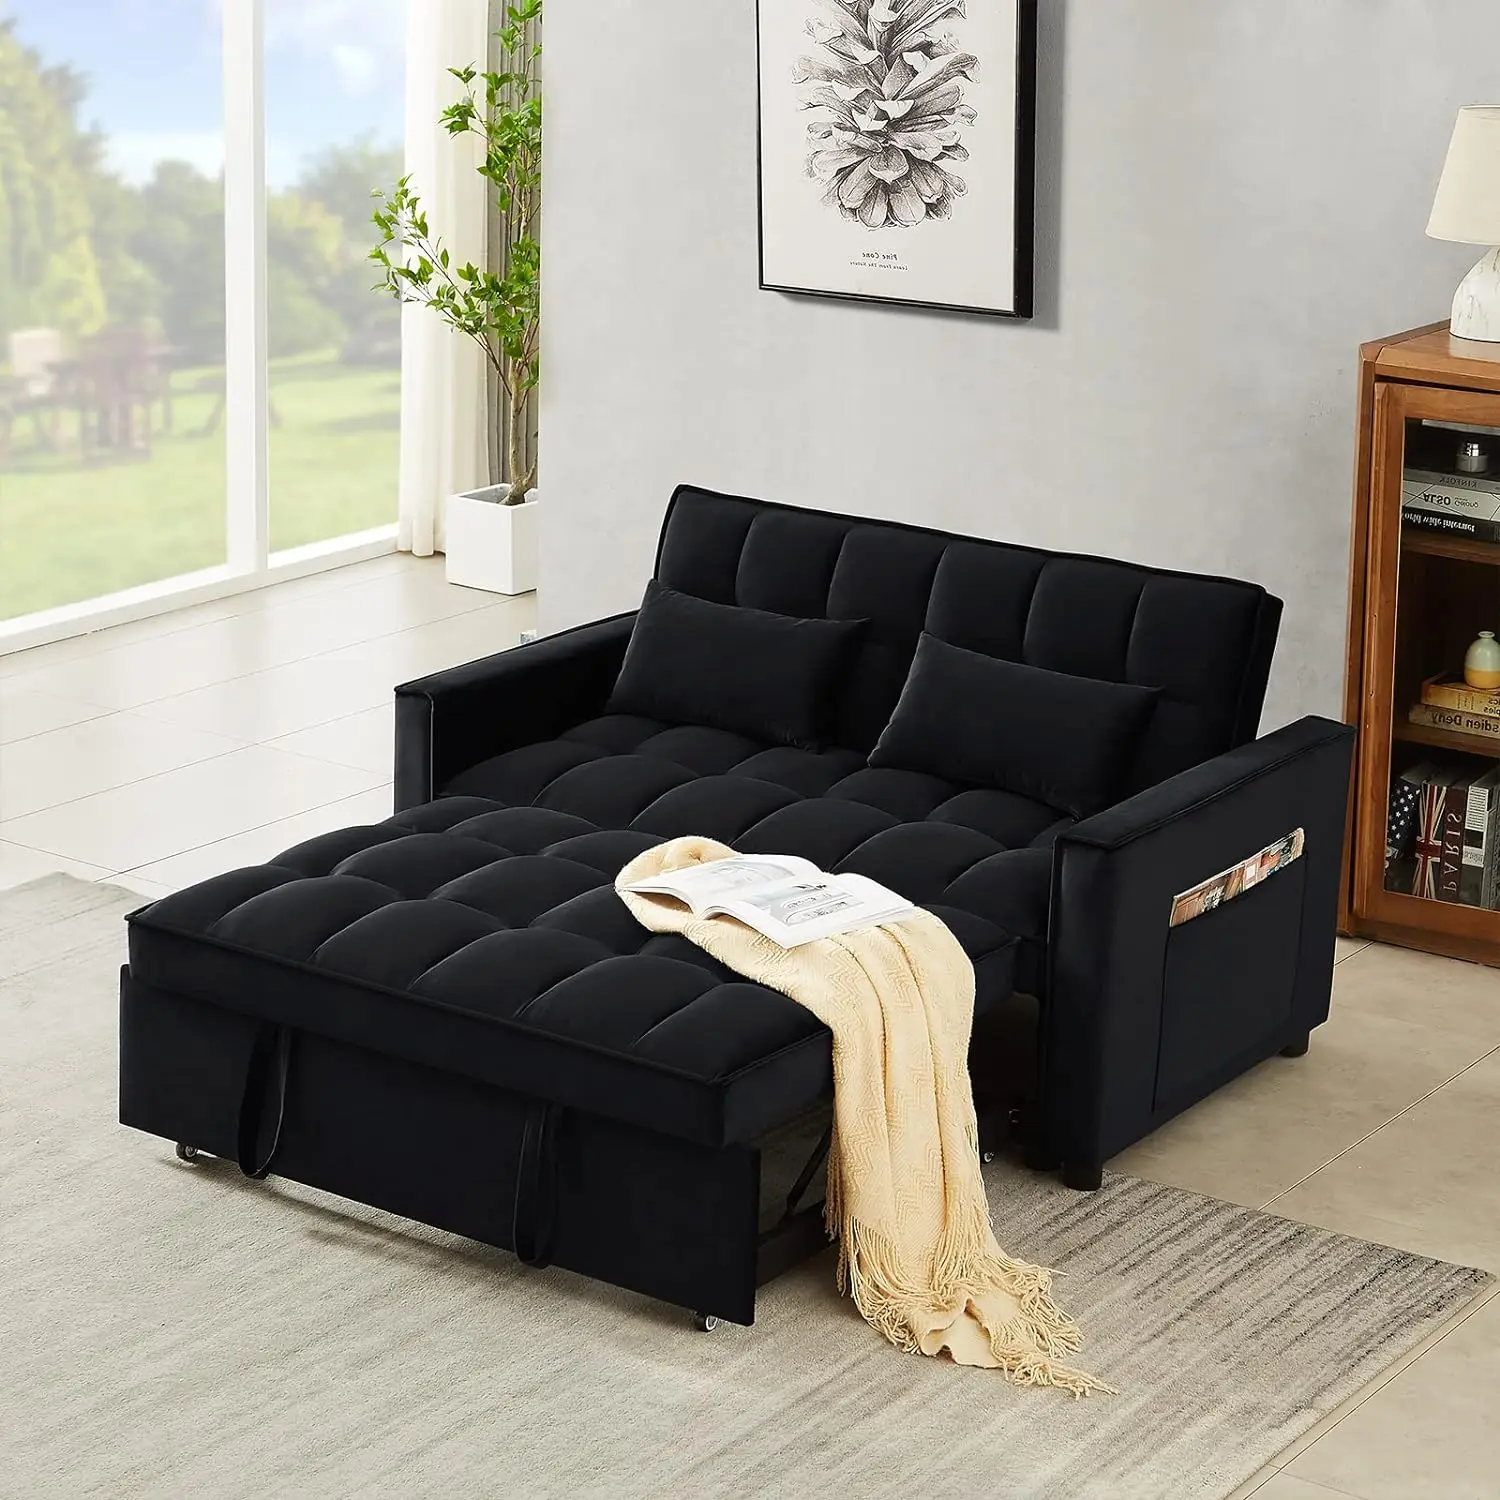 

3 in 1 Convertible Sleeper Loveseat, Futon Sofa Couch With Pullout Bed, Reclining Backrest, Modern Velvet Small Love Seat